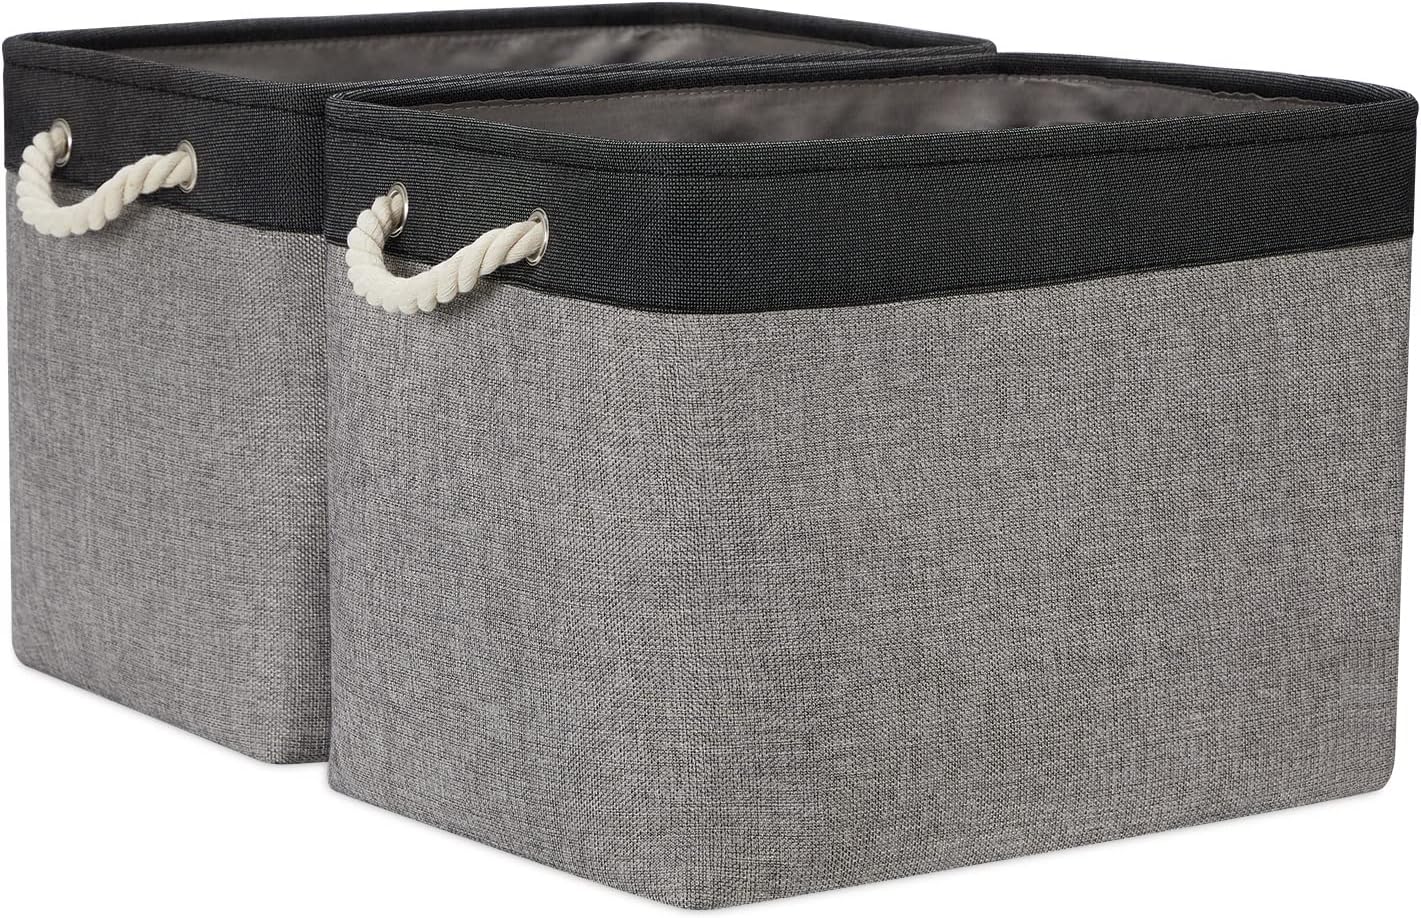 Temary Large Storage Baskets 2 Pack Cloth Basket for Shelves Collapsible Decorative Storage Organizer Baskets Canvas Storage Bins with Handles for Nursery, Office, Home(Grey&Black,16Lx12Wx12H Inches)